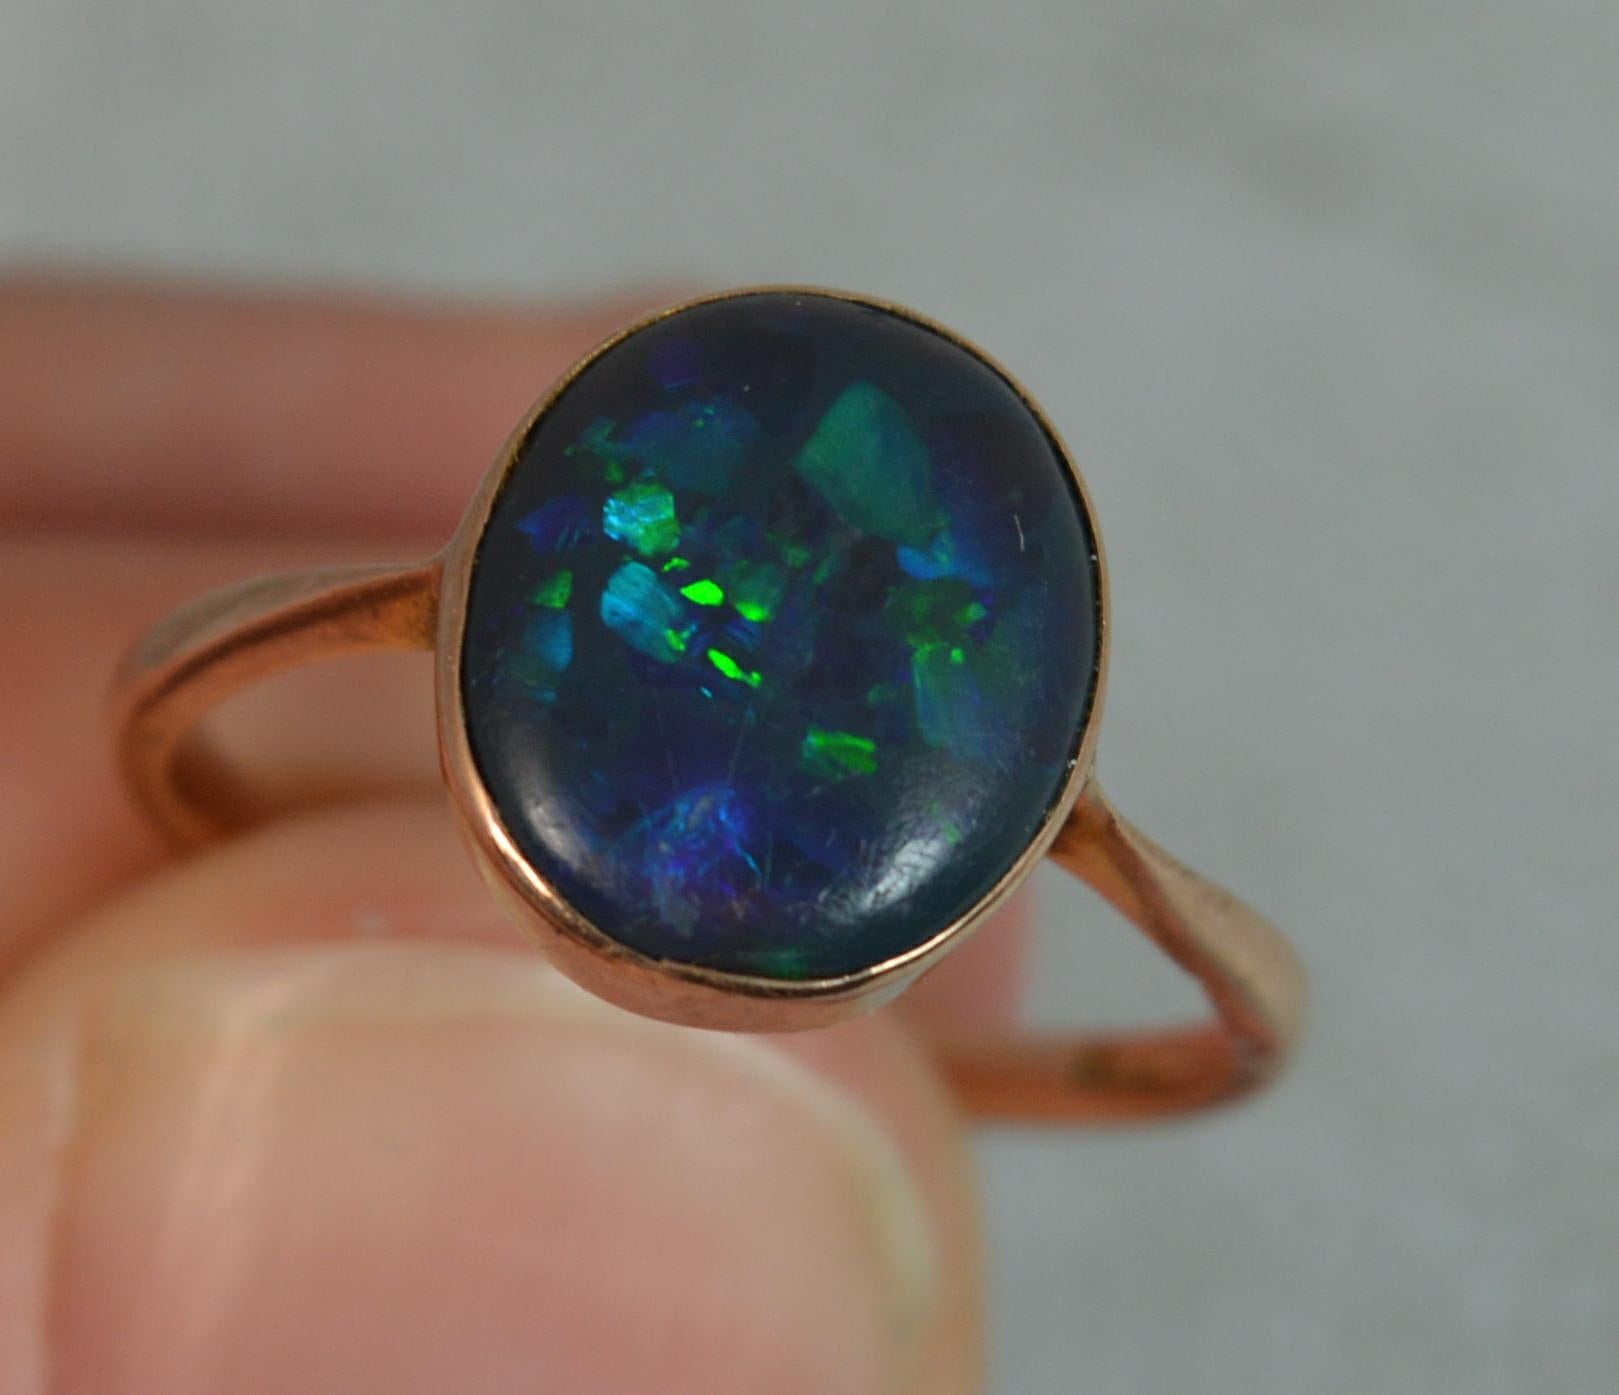 A rare Edwardian era 9ct gold and natural black opal solitaire ring.
SIZE ; M 1/2 UK, 6 1/2 US
The opal to measure 9.8mm x 11.2mm approx and set into a fine plain gold bezel setting. Fine colourful example.
Circa 1910.

CONDITION ; Good for age.